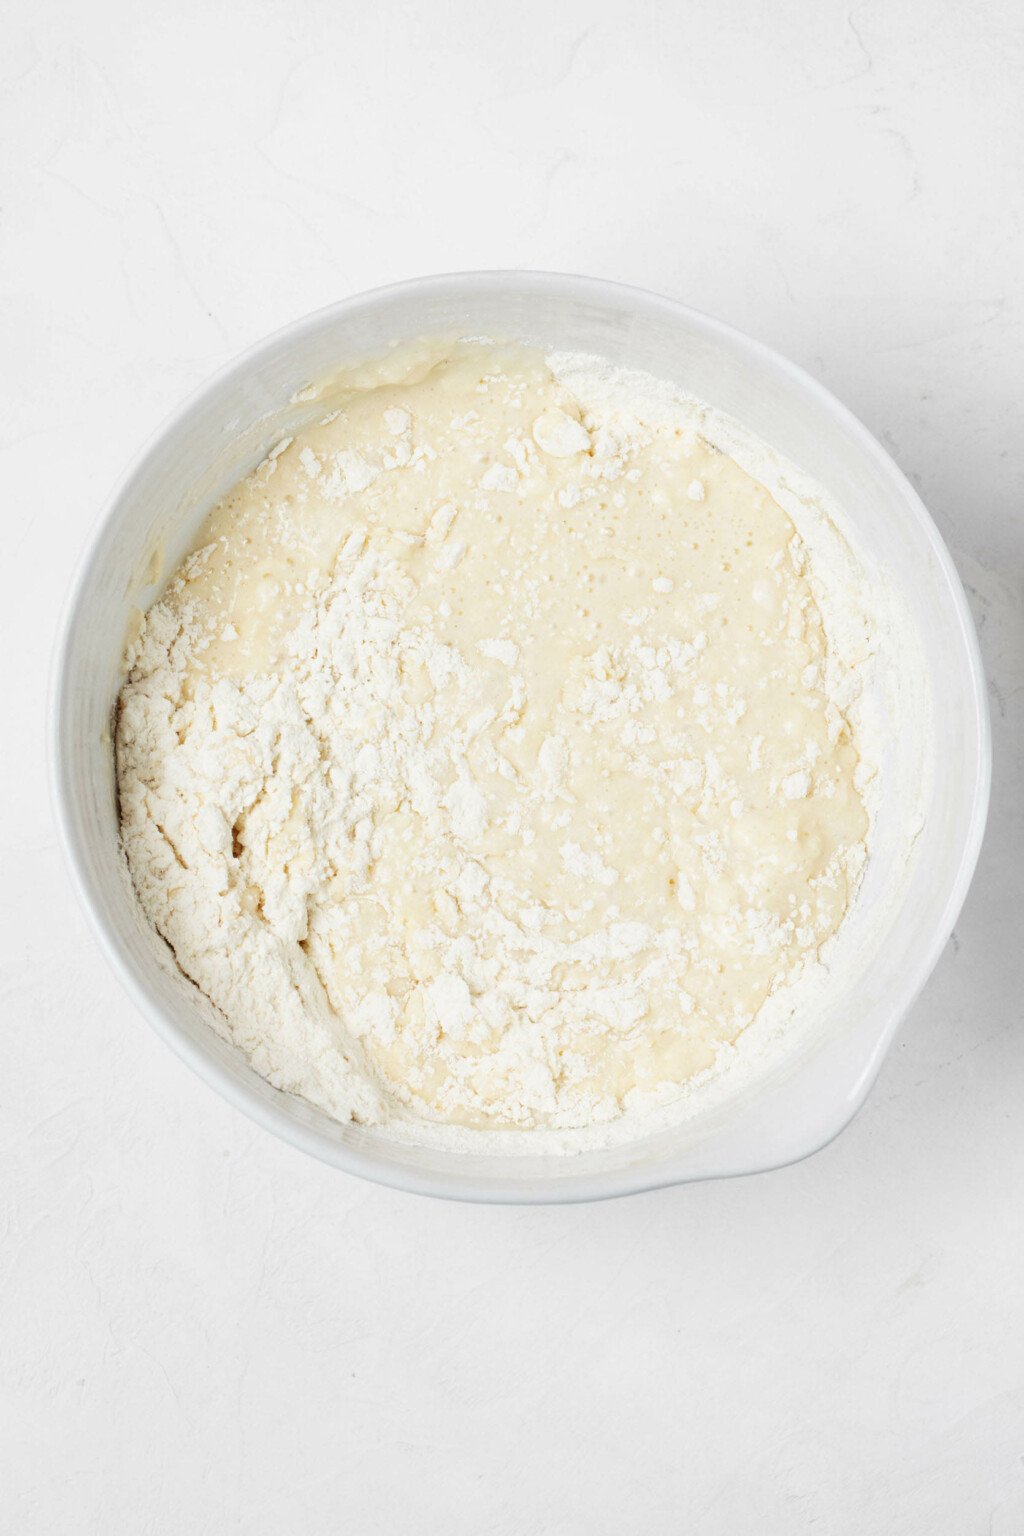 An overhead image of a large, white mixing bowl that's filled with a cake batter in the making.